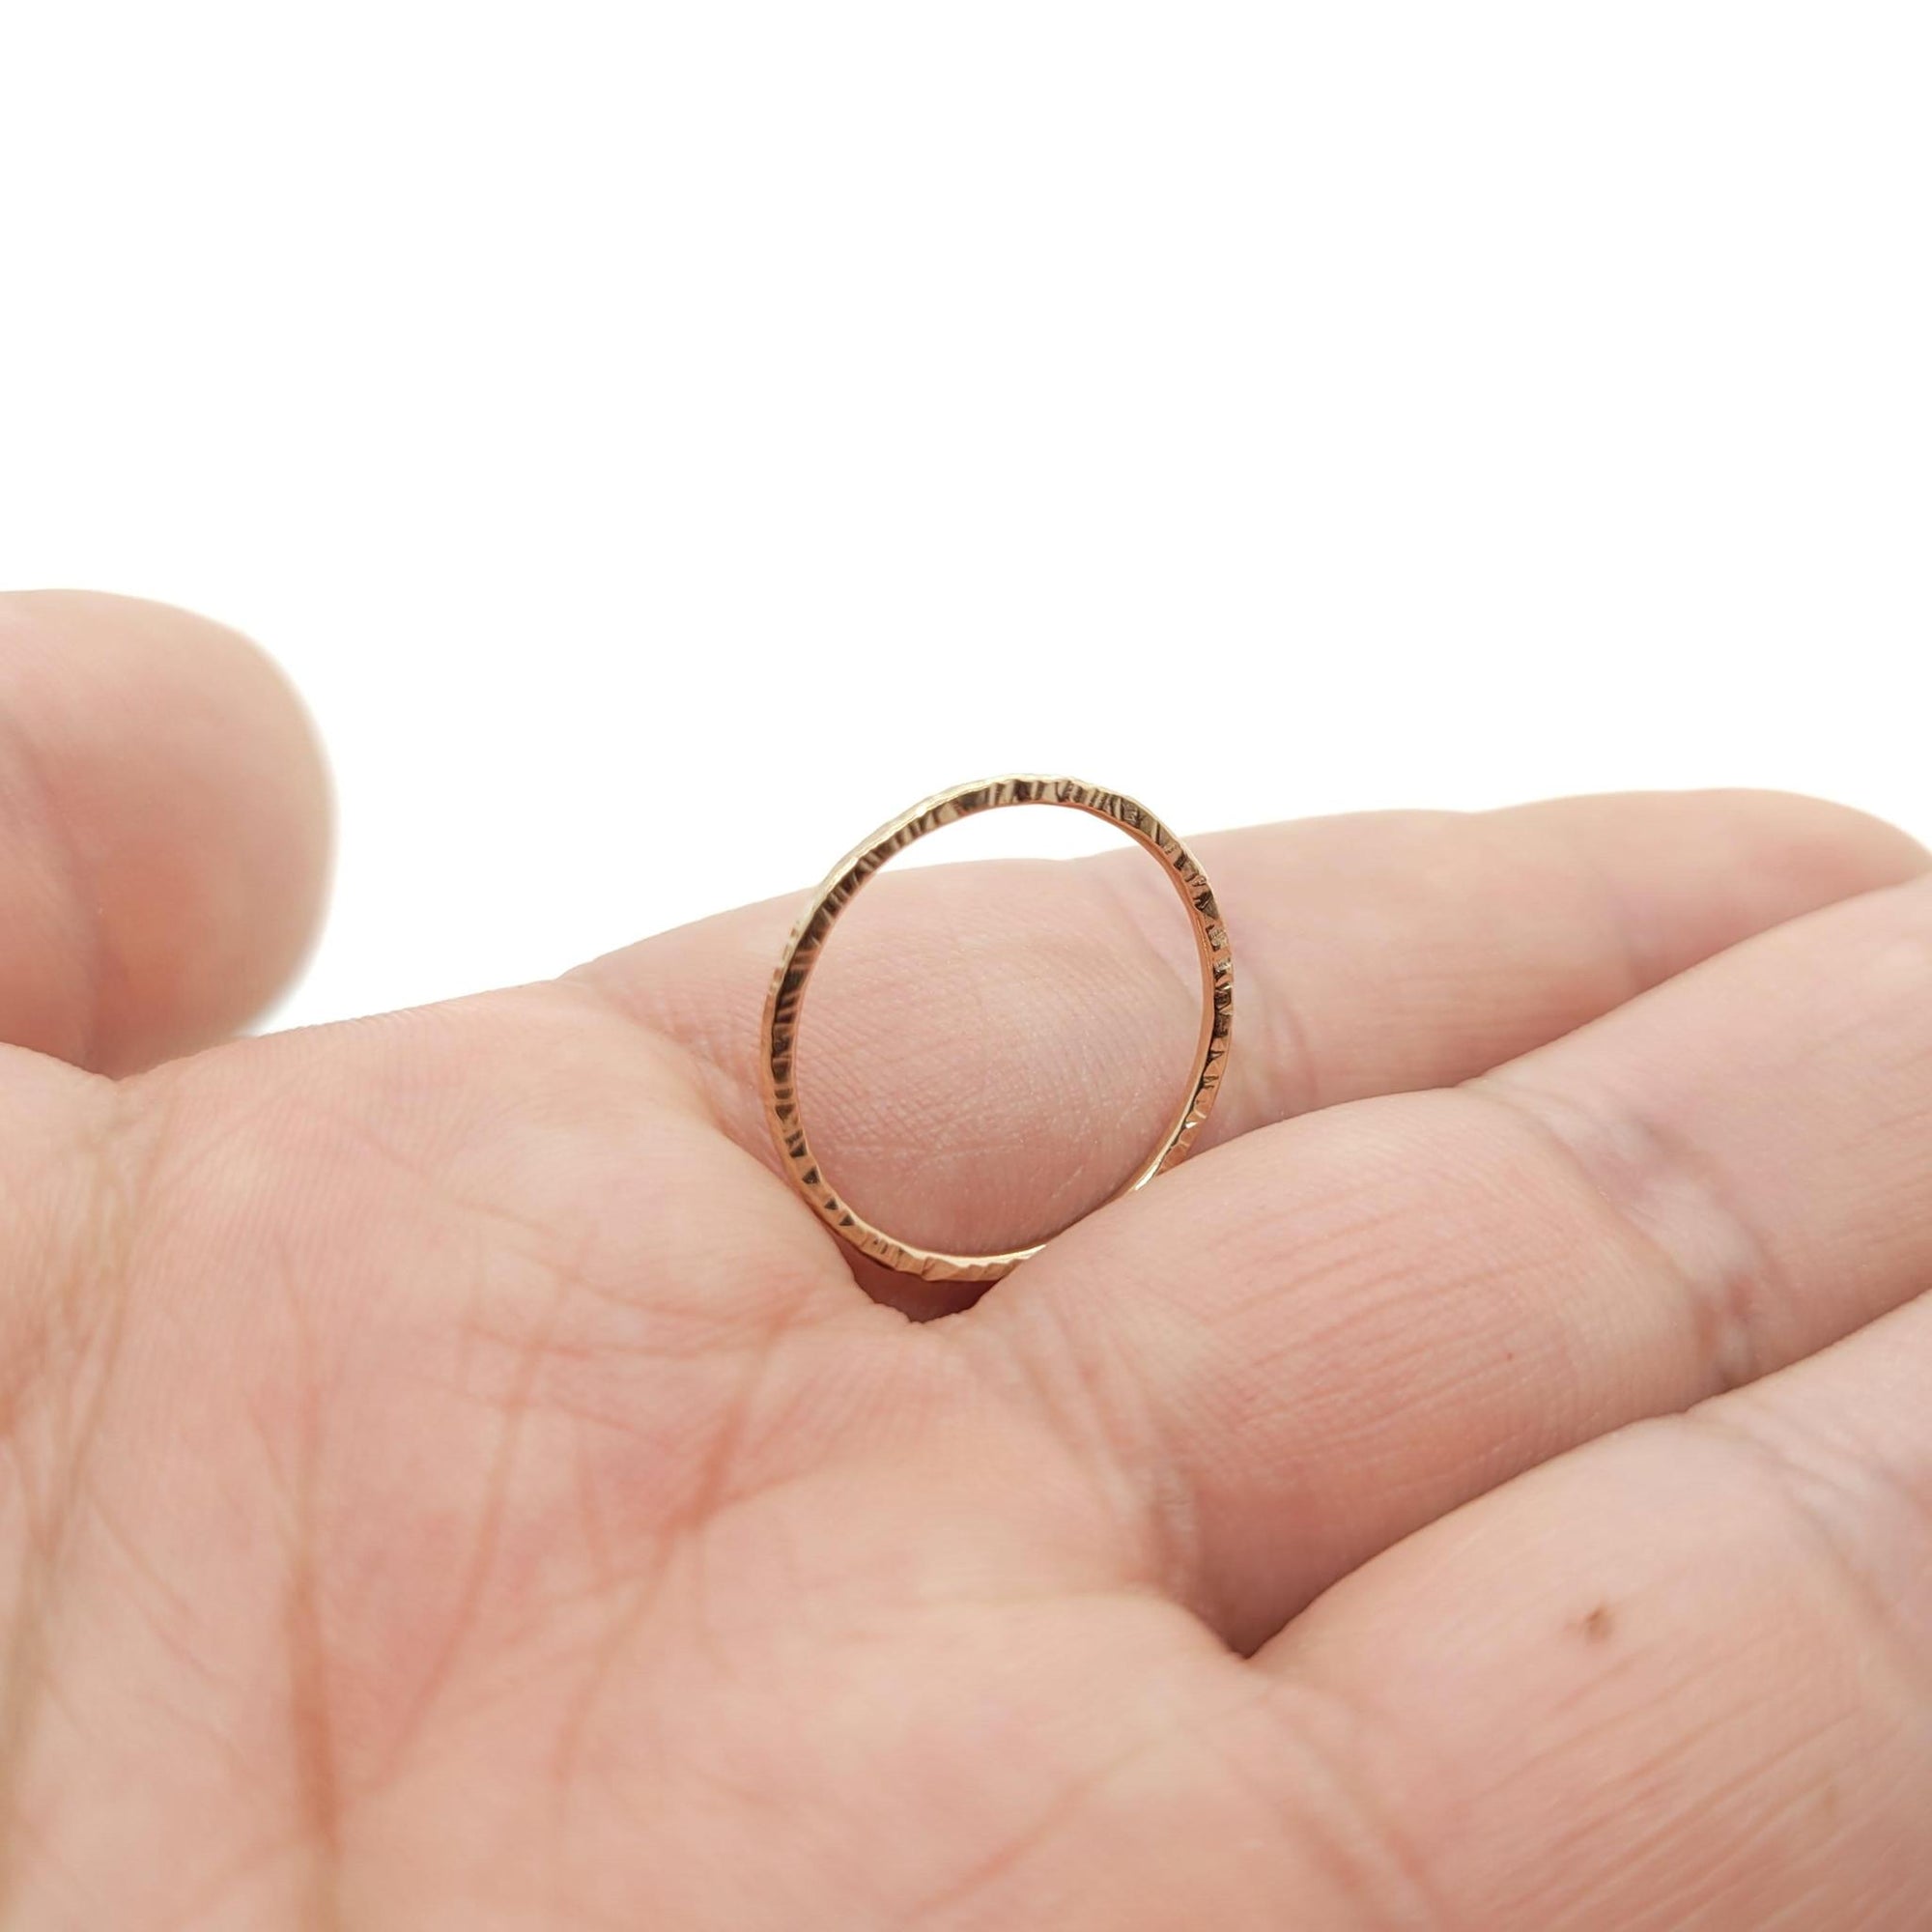 Ring - Size 7.5 - Thin 14k Rose Gold Wood Grain Texture by Taviametal